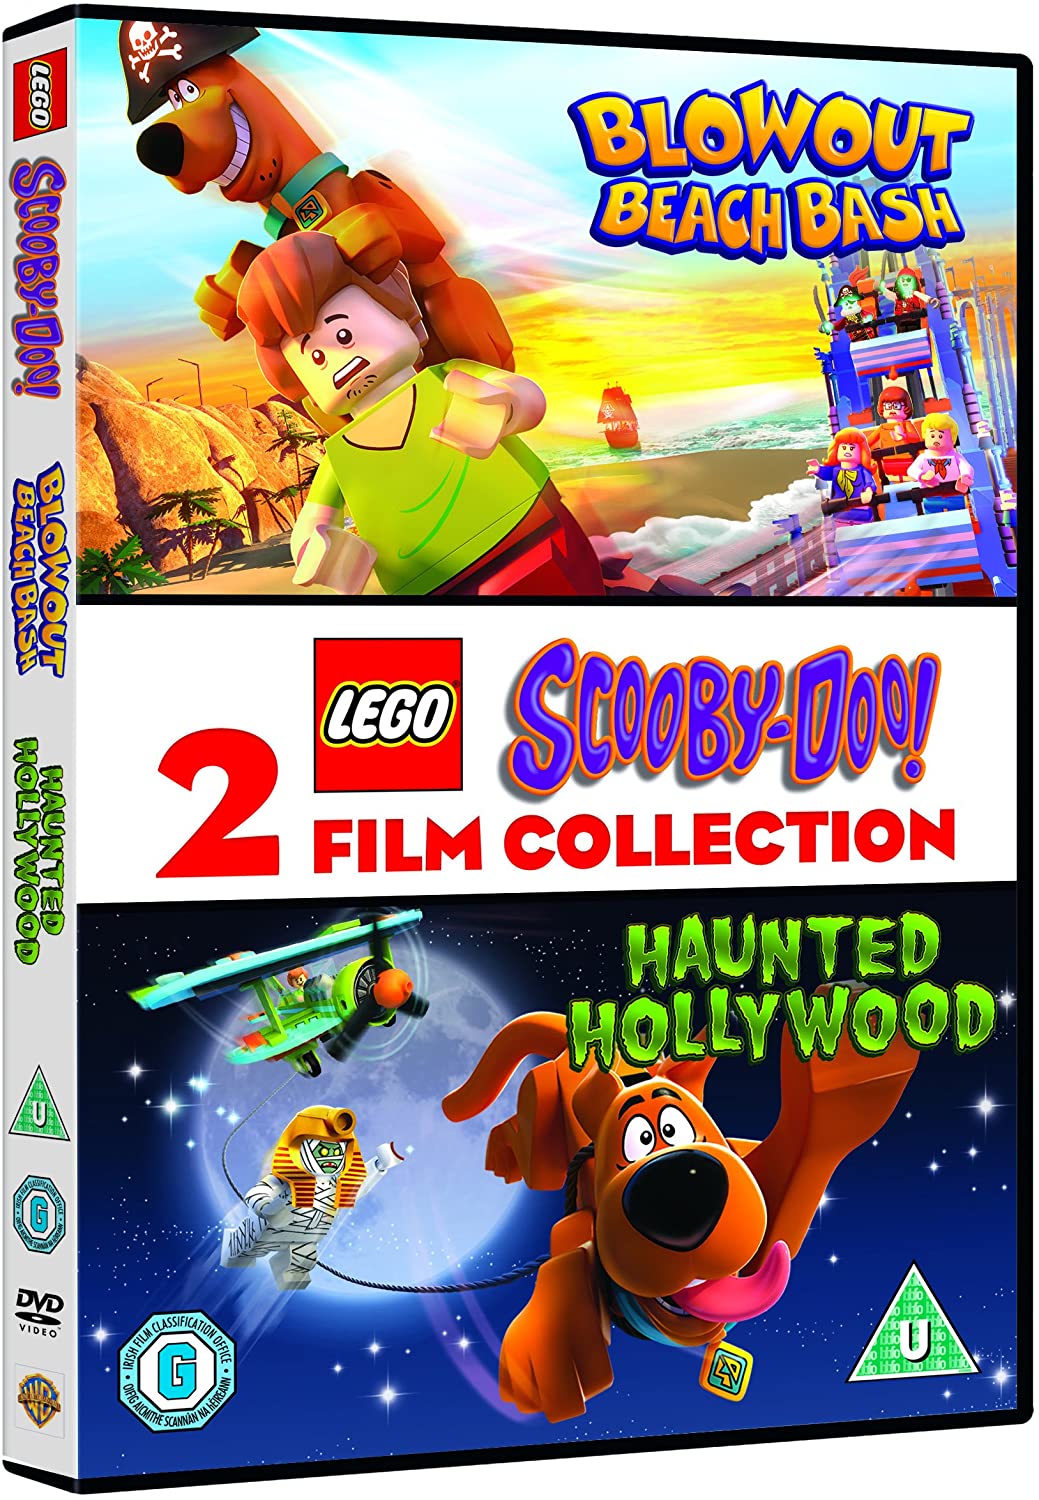 LEGO SCOOBY DOO DOUBLE PACK S) [2017]